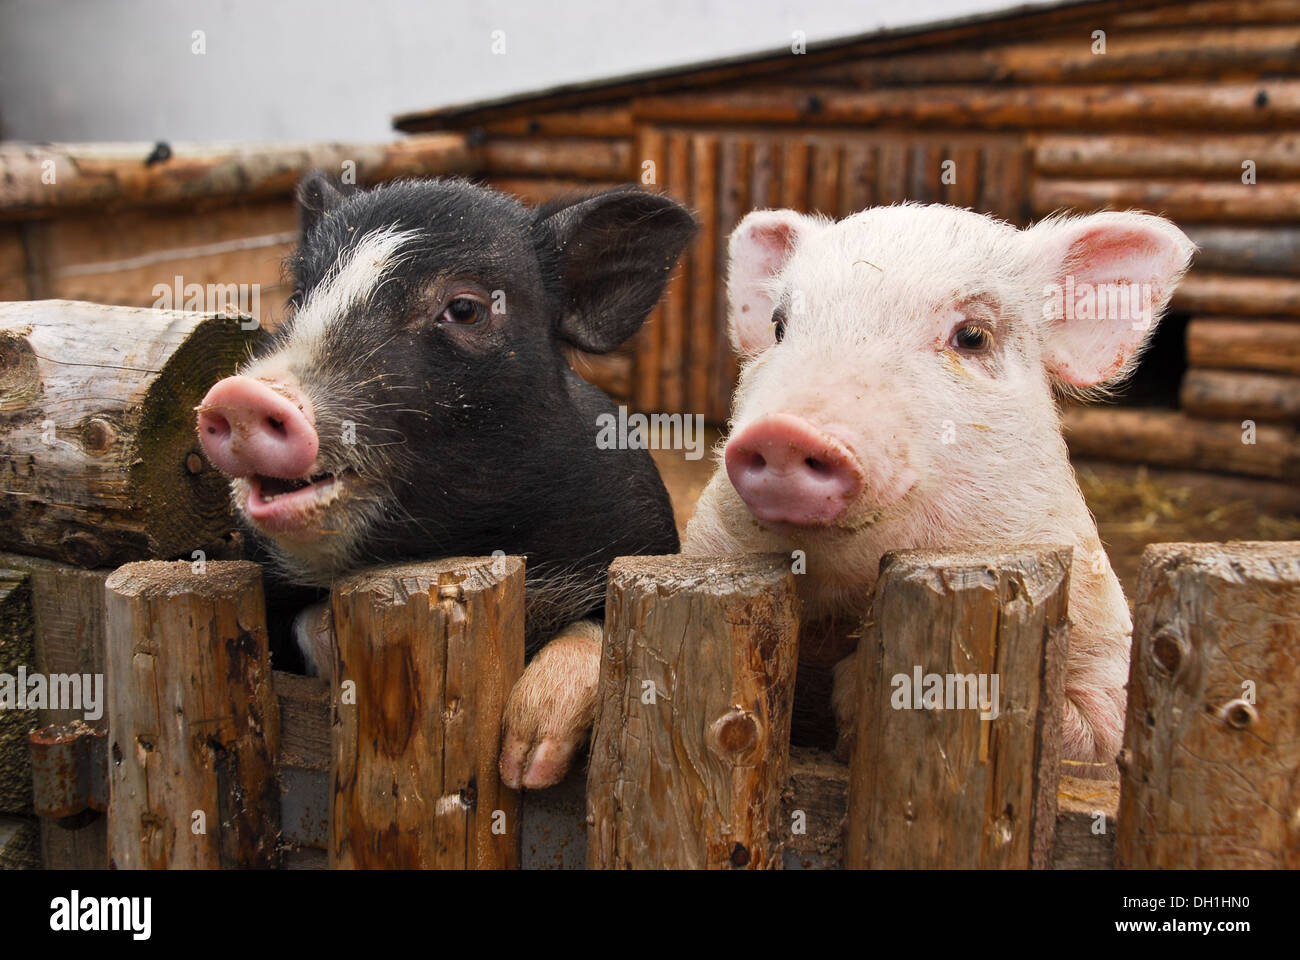 two pigs in zoo garden Stock Photo